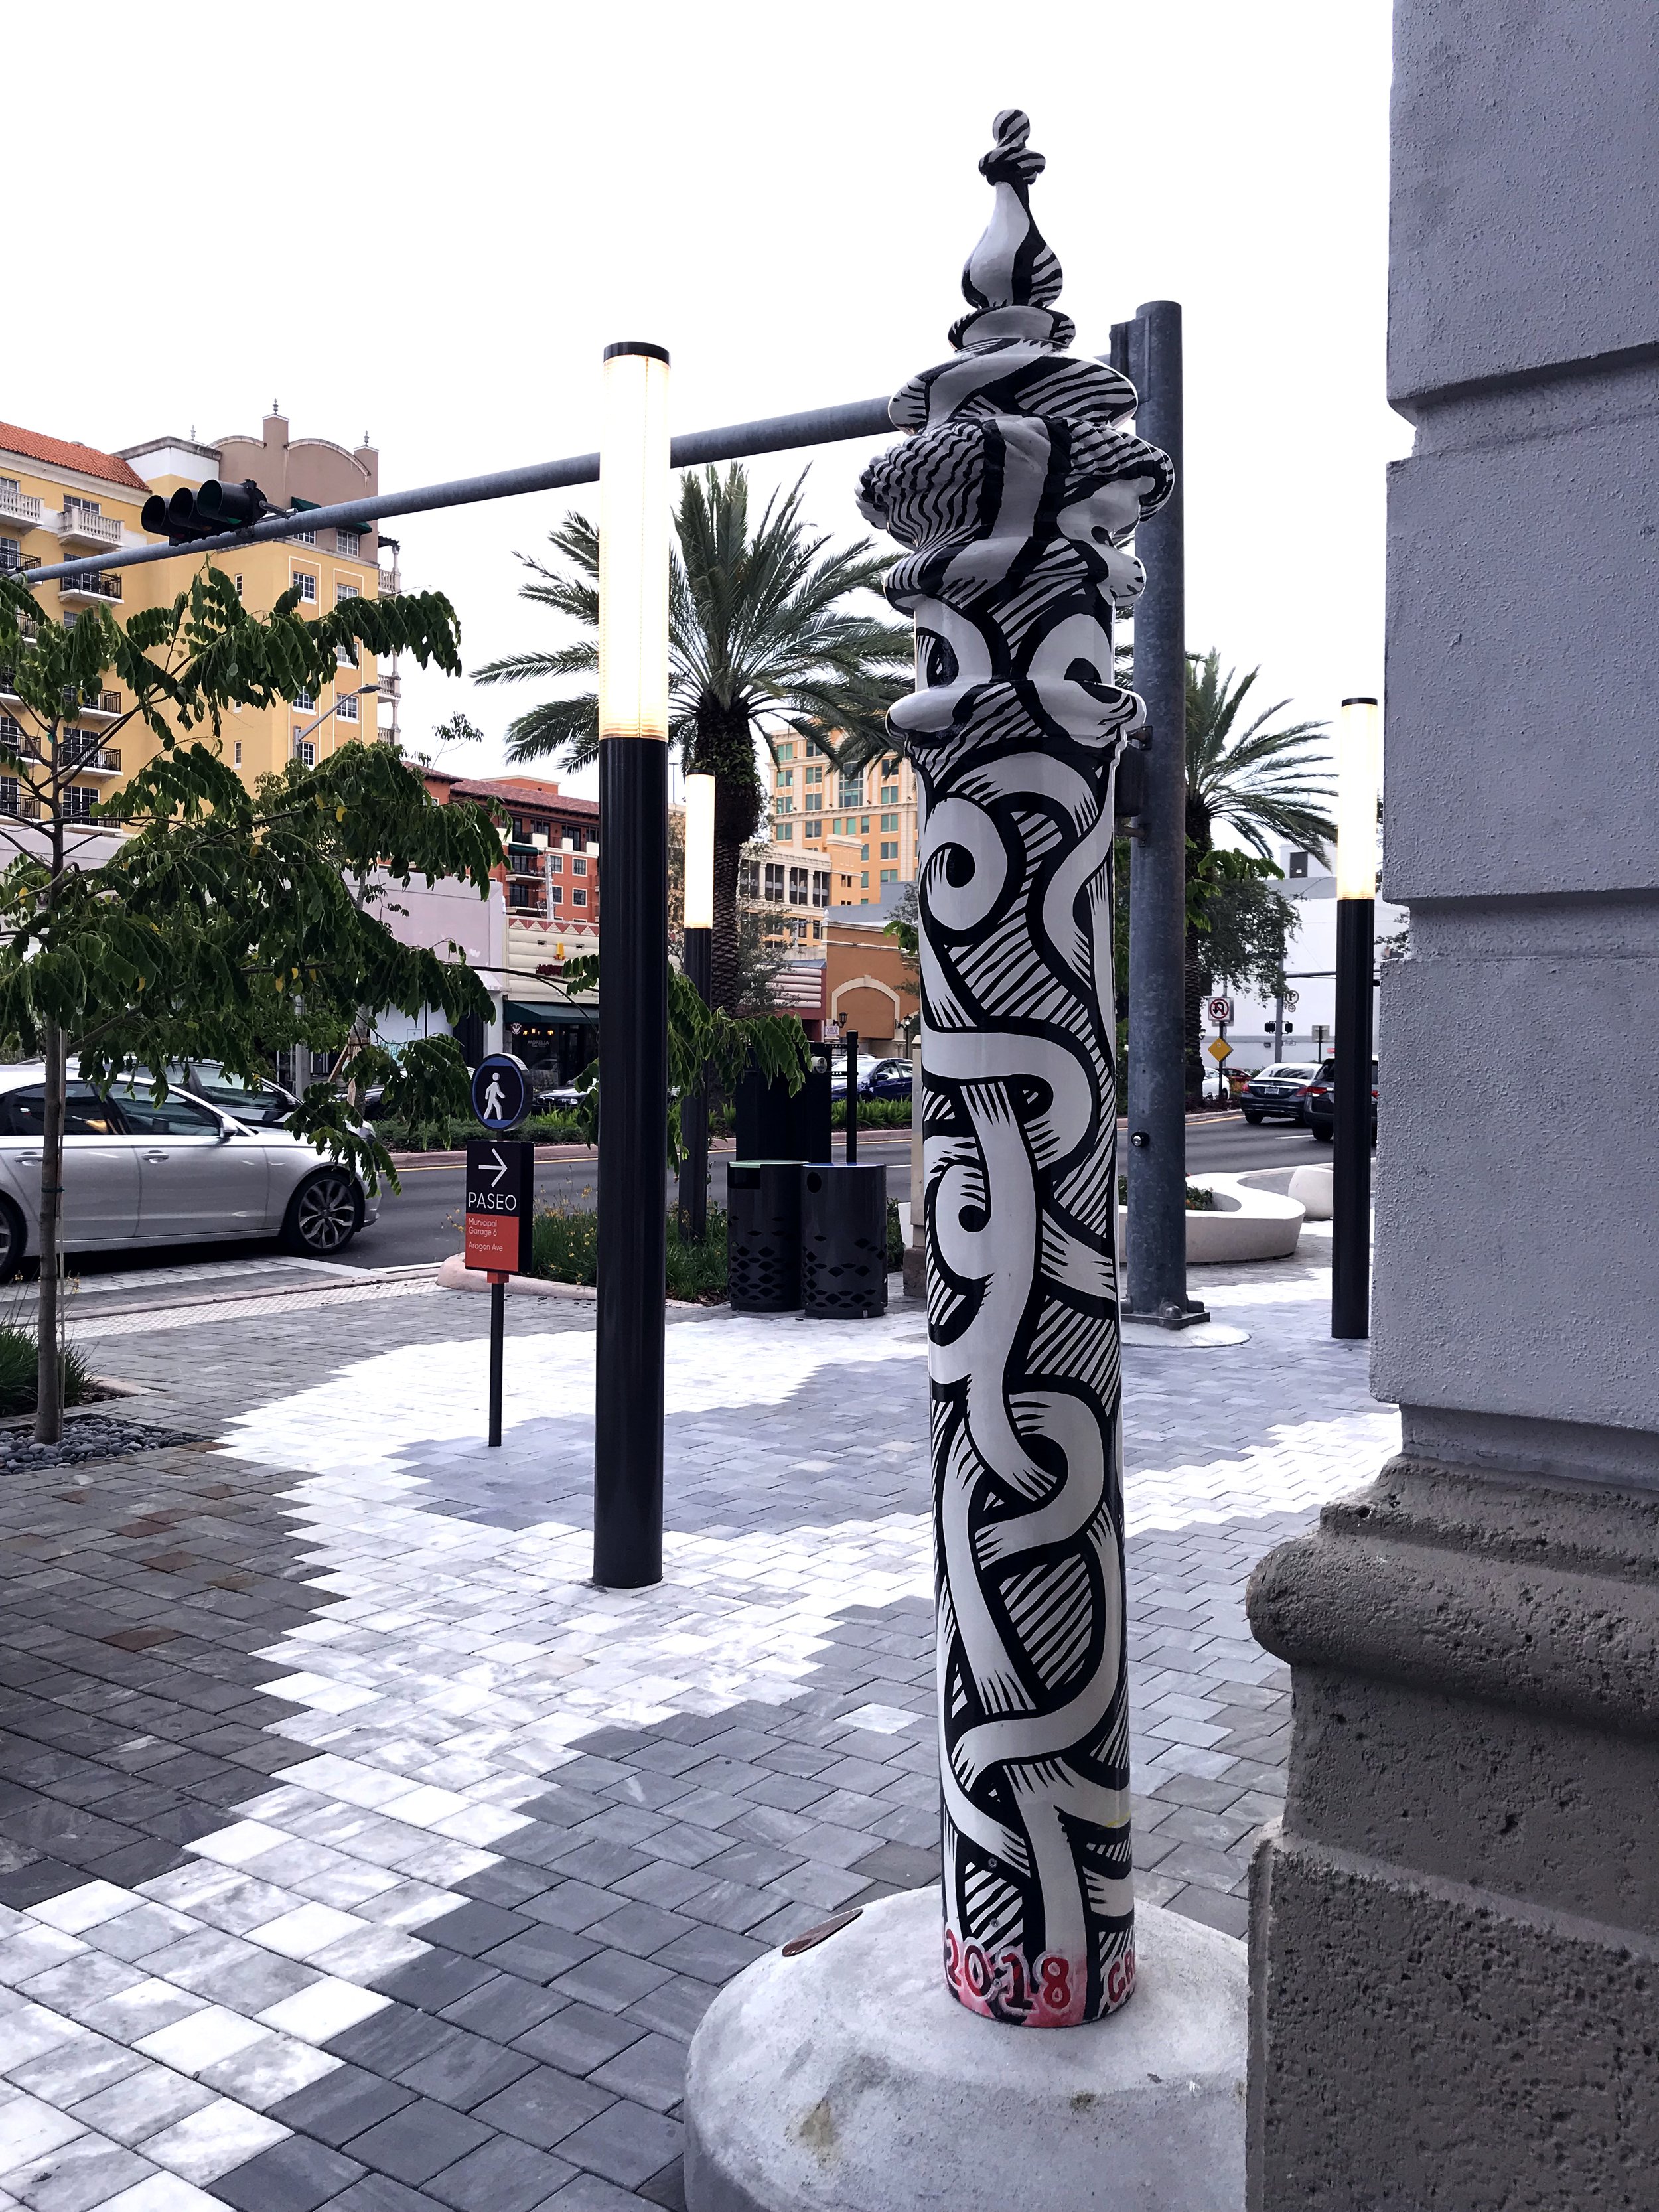   Venetian Knotwork  commissioned by The City of Coral Gables for Venice in the Gables. part of my Knotwork series 55 Miracle Mile, Coral Gables, FL, 33134. 2018 